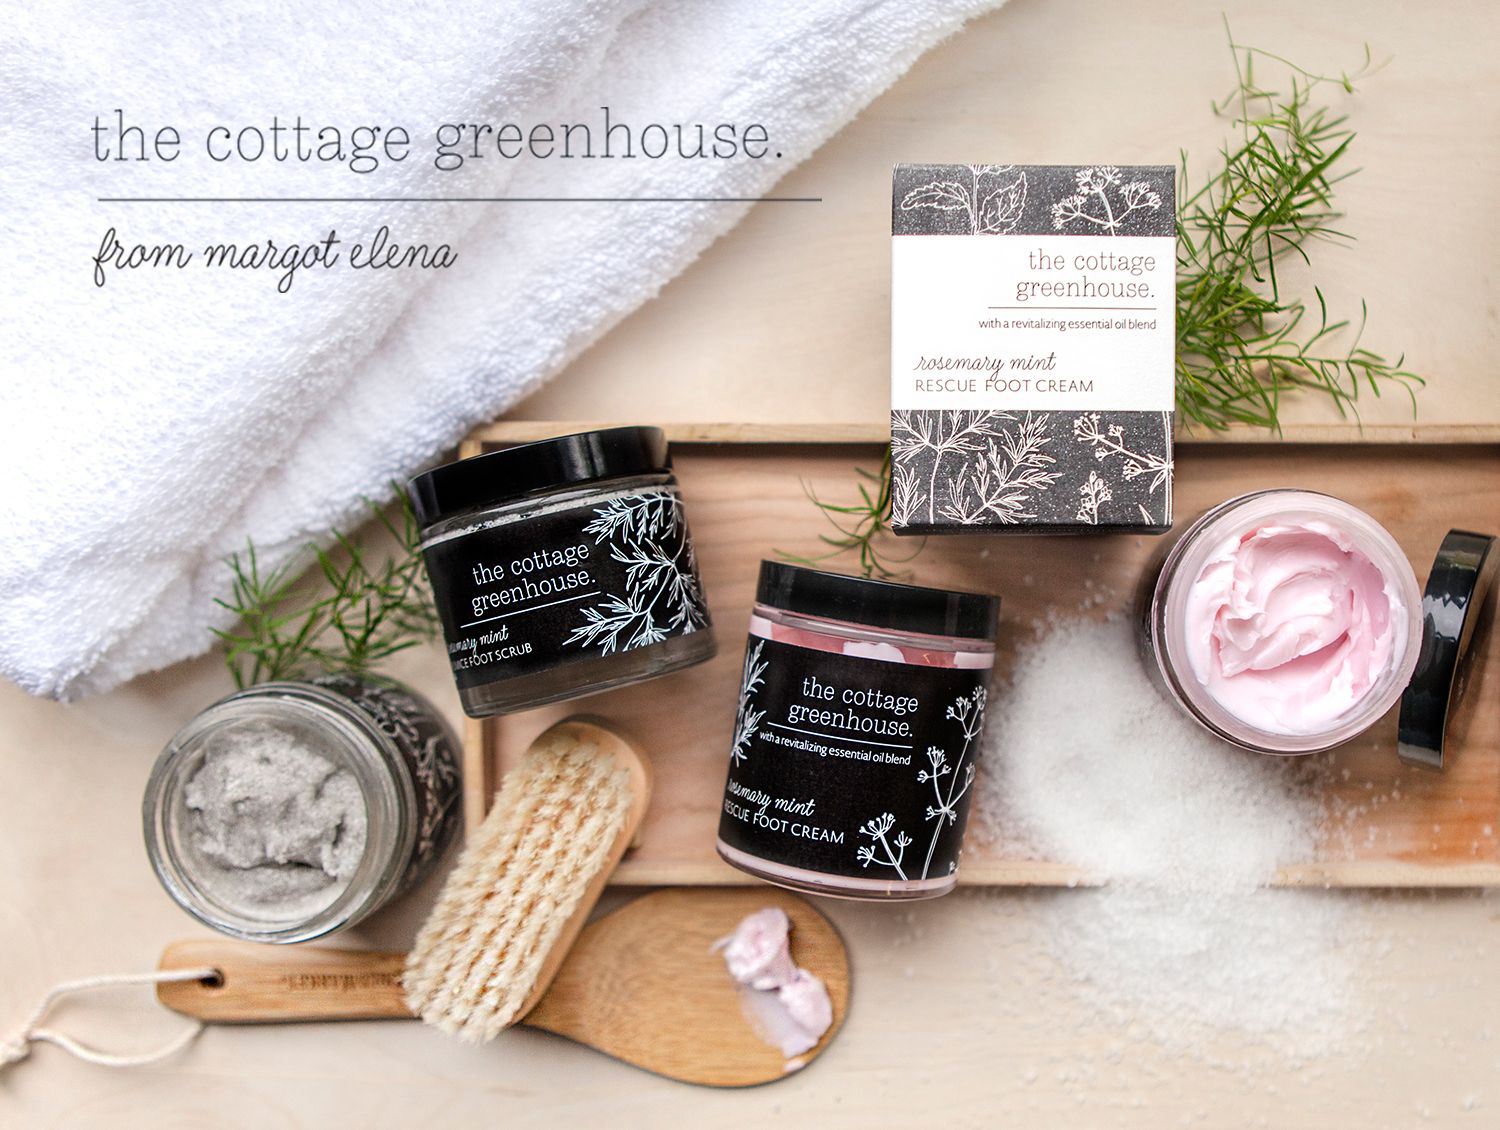 Image of Rosemary Foot Care Collection displayed with The Cottage Greenhouse logo.